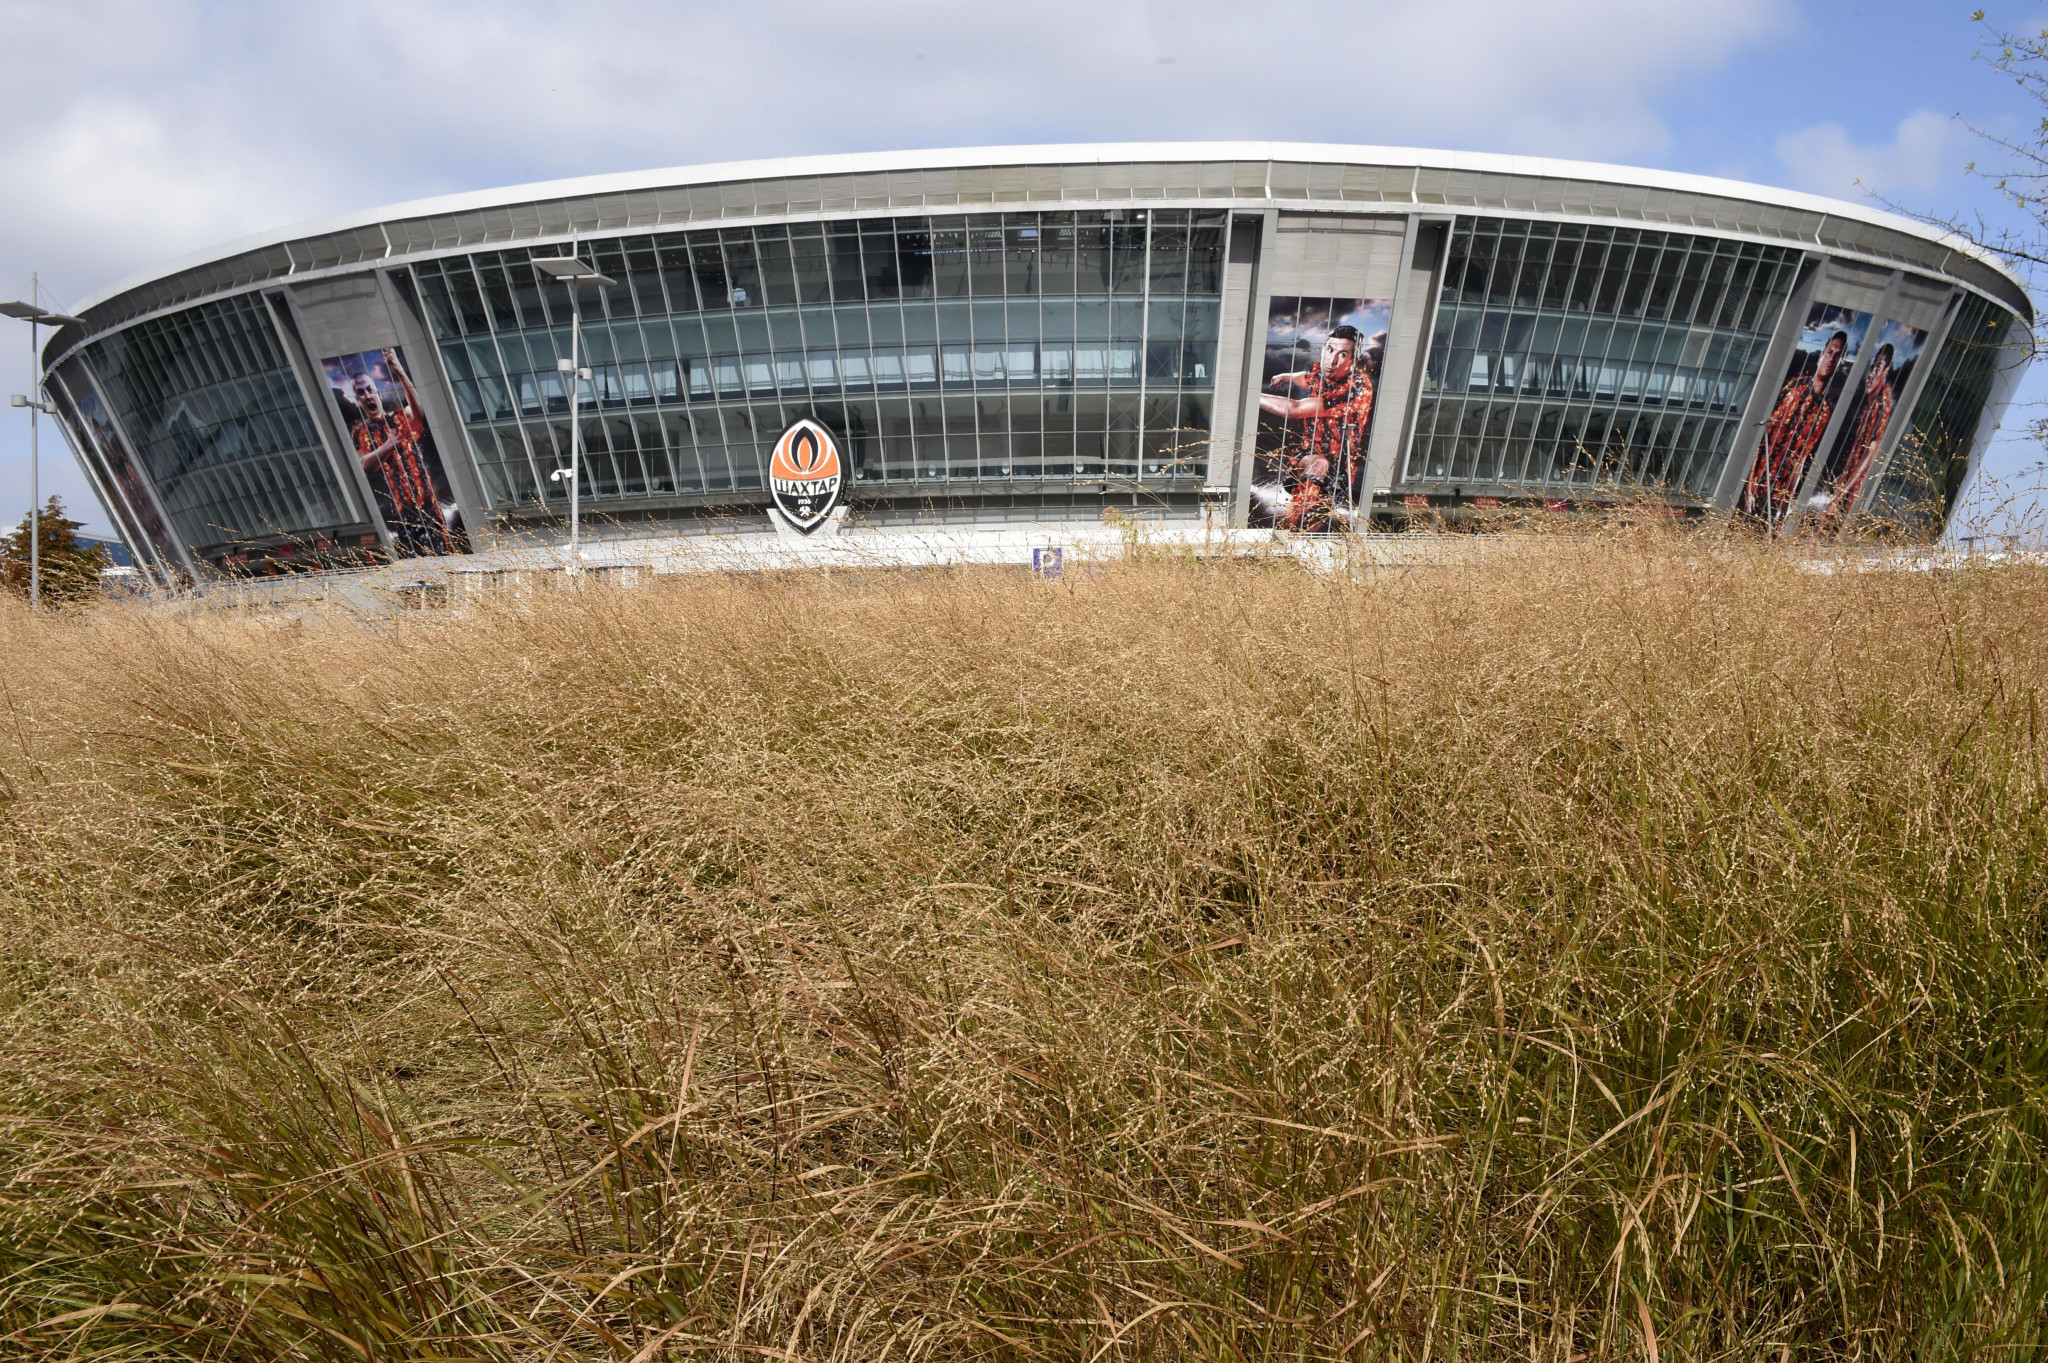 Shakhtar Donetsk's Donbass Arena has been unused since May 2014 because of conflict between Ukraine and Russia ©Getty Images